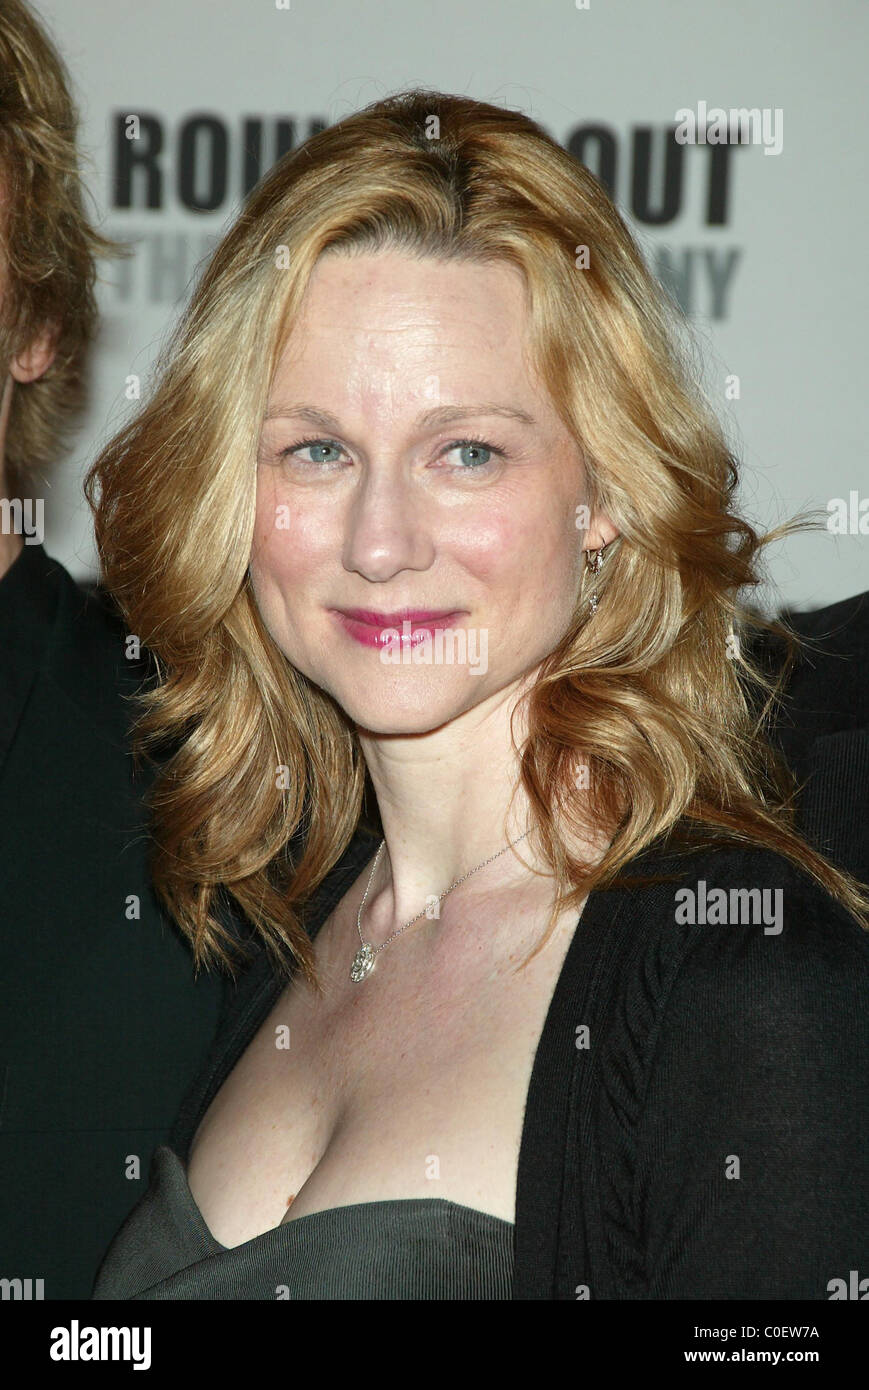 Laura Linney Opening Night of "Les Liaisons Dangereuses" - Party Arrivals at the American Airlines Theatre. New York City, USA Stock Photo